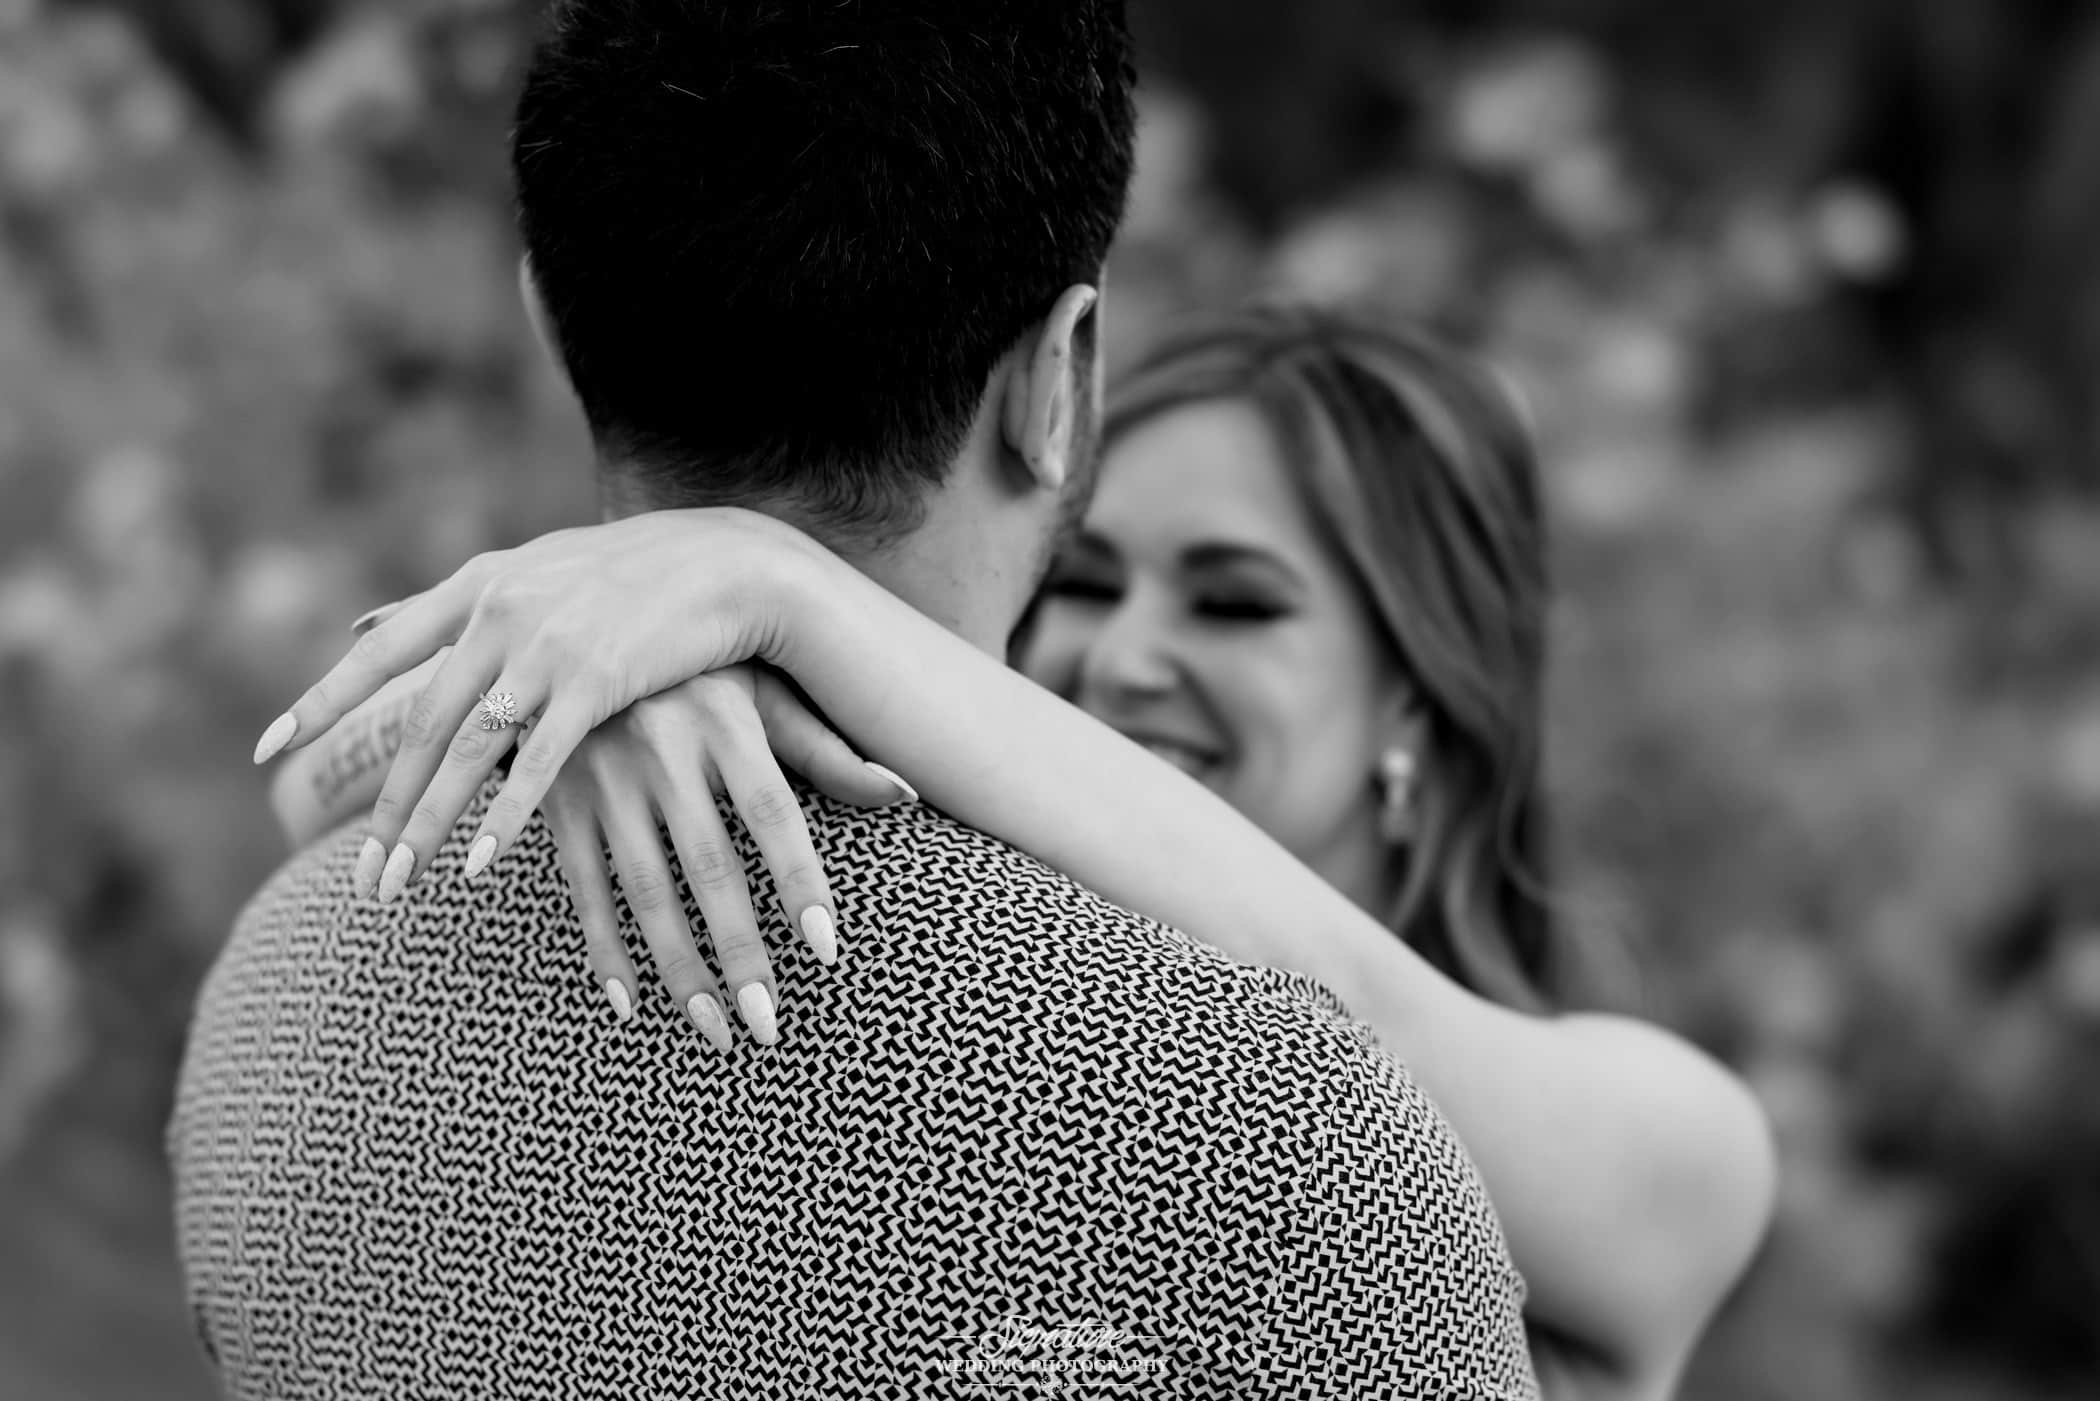 Woman's arms around man's shoulders black and white